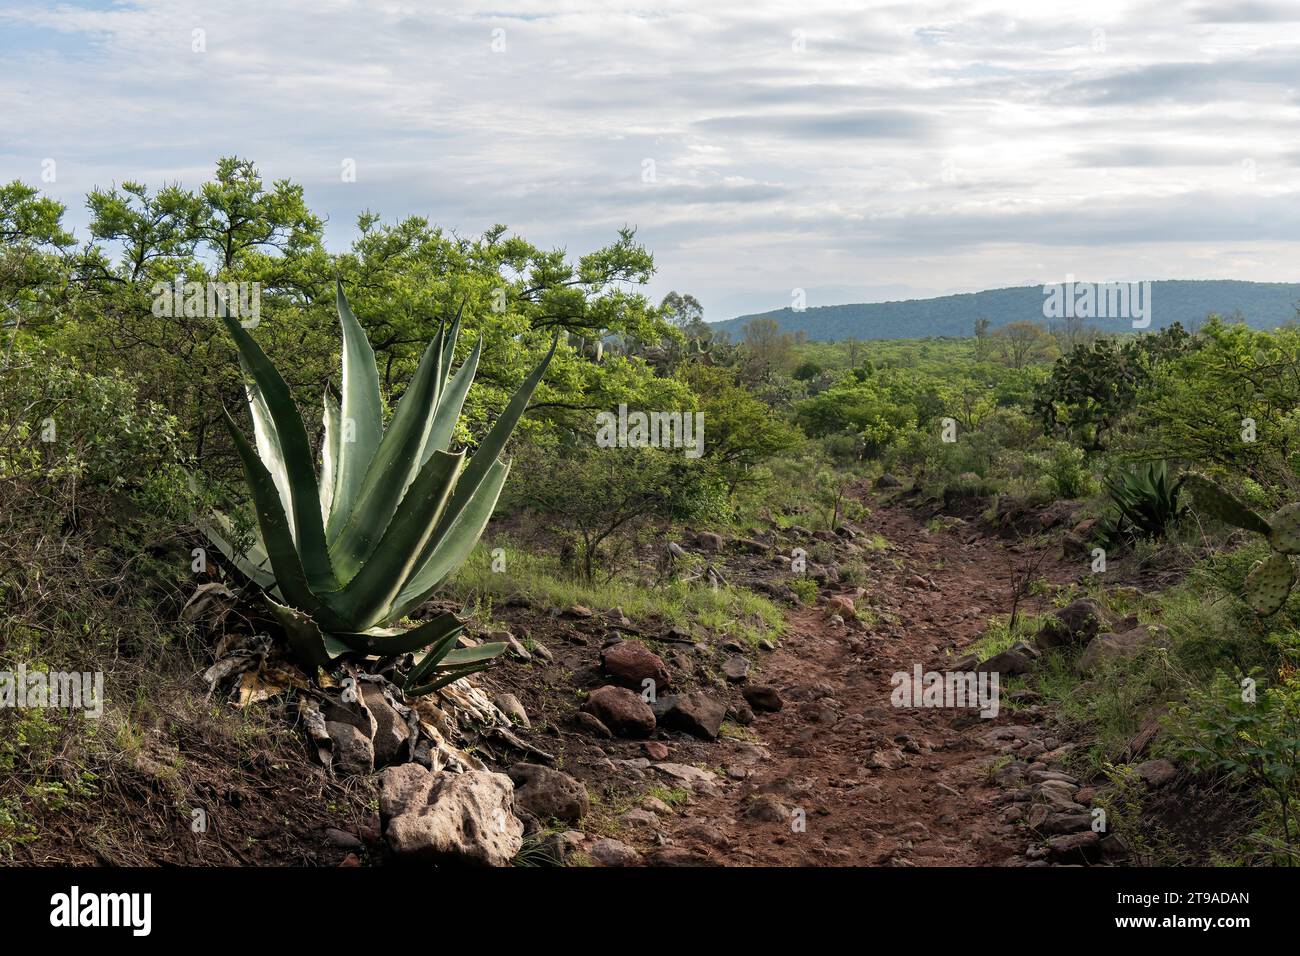 Explore the serene blend of Agave Salmiana amidst the natural landscape. From rugged mountains to open skies, discover the harmonious interplay of pla Stock Photo